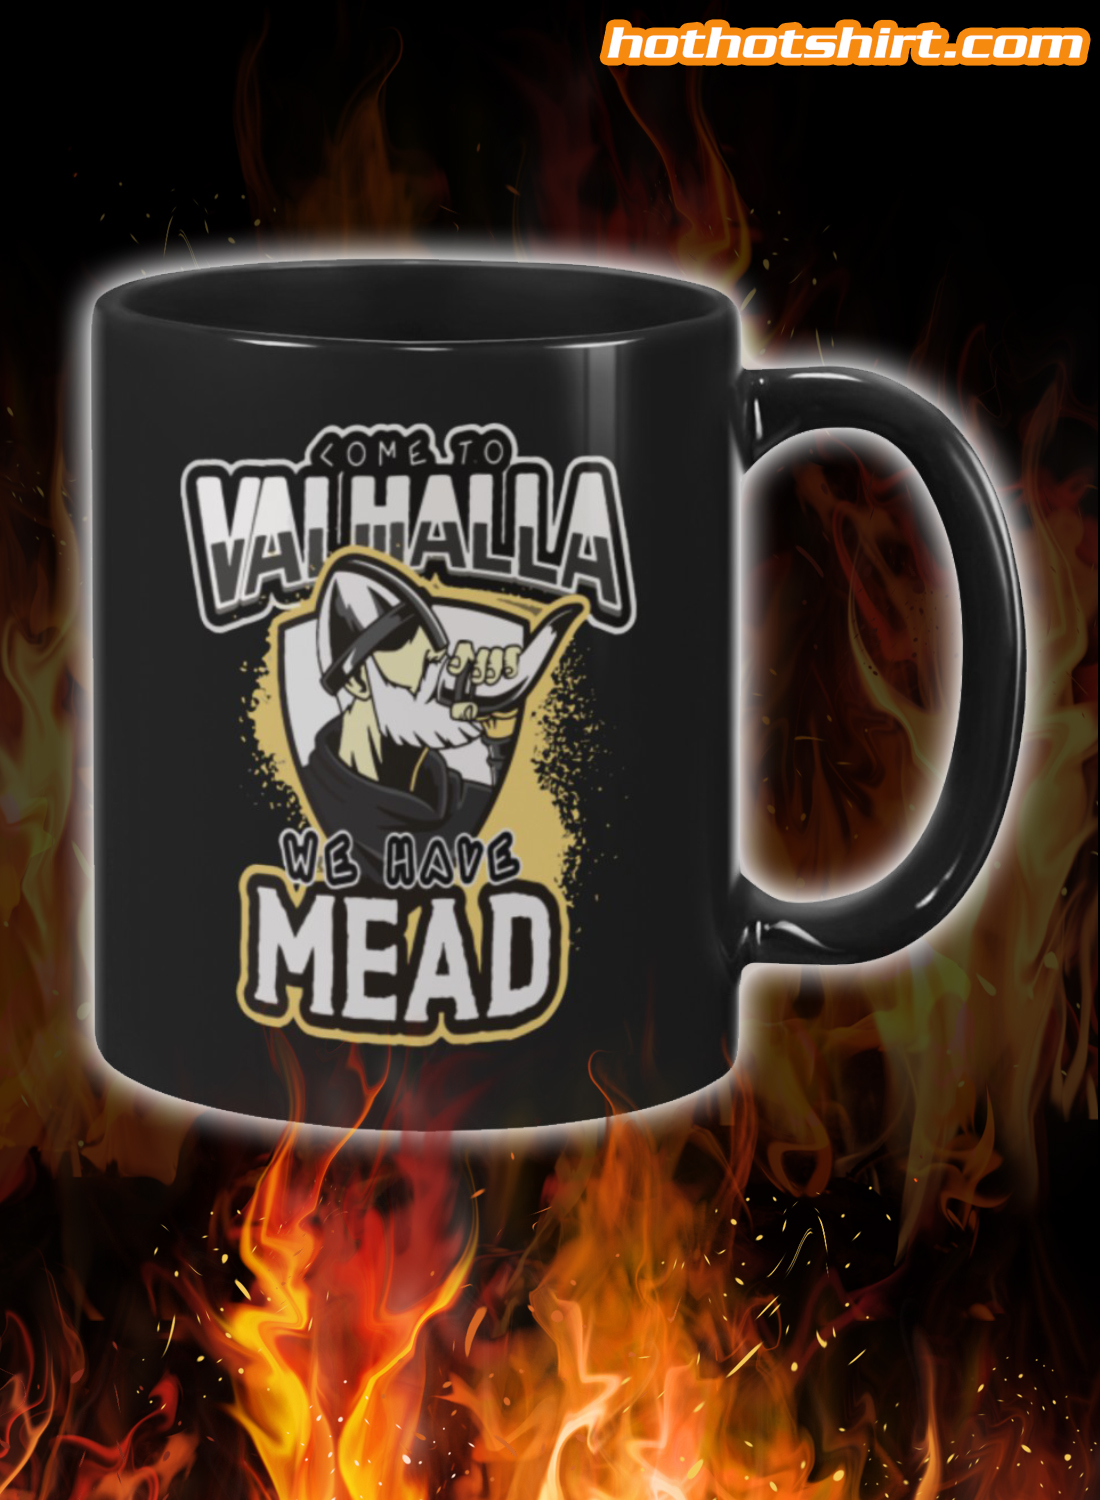 Come to valhalla we have mead mug 3